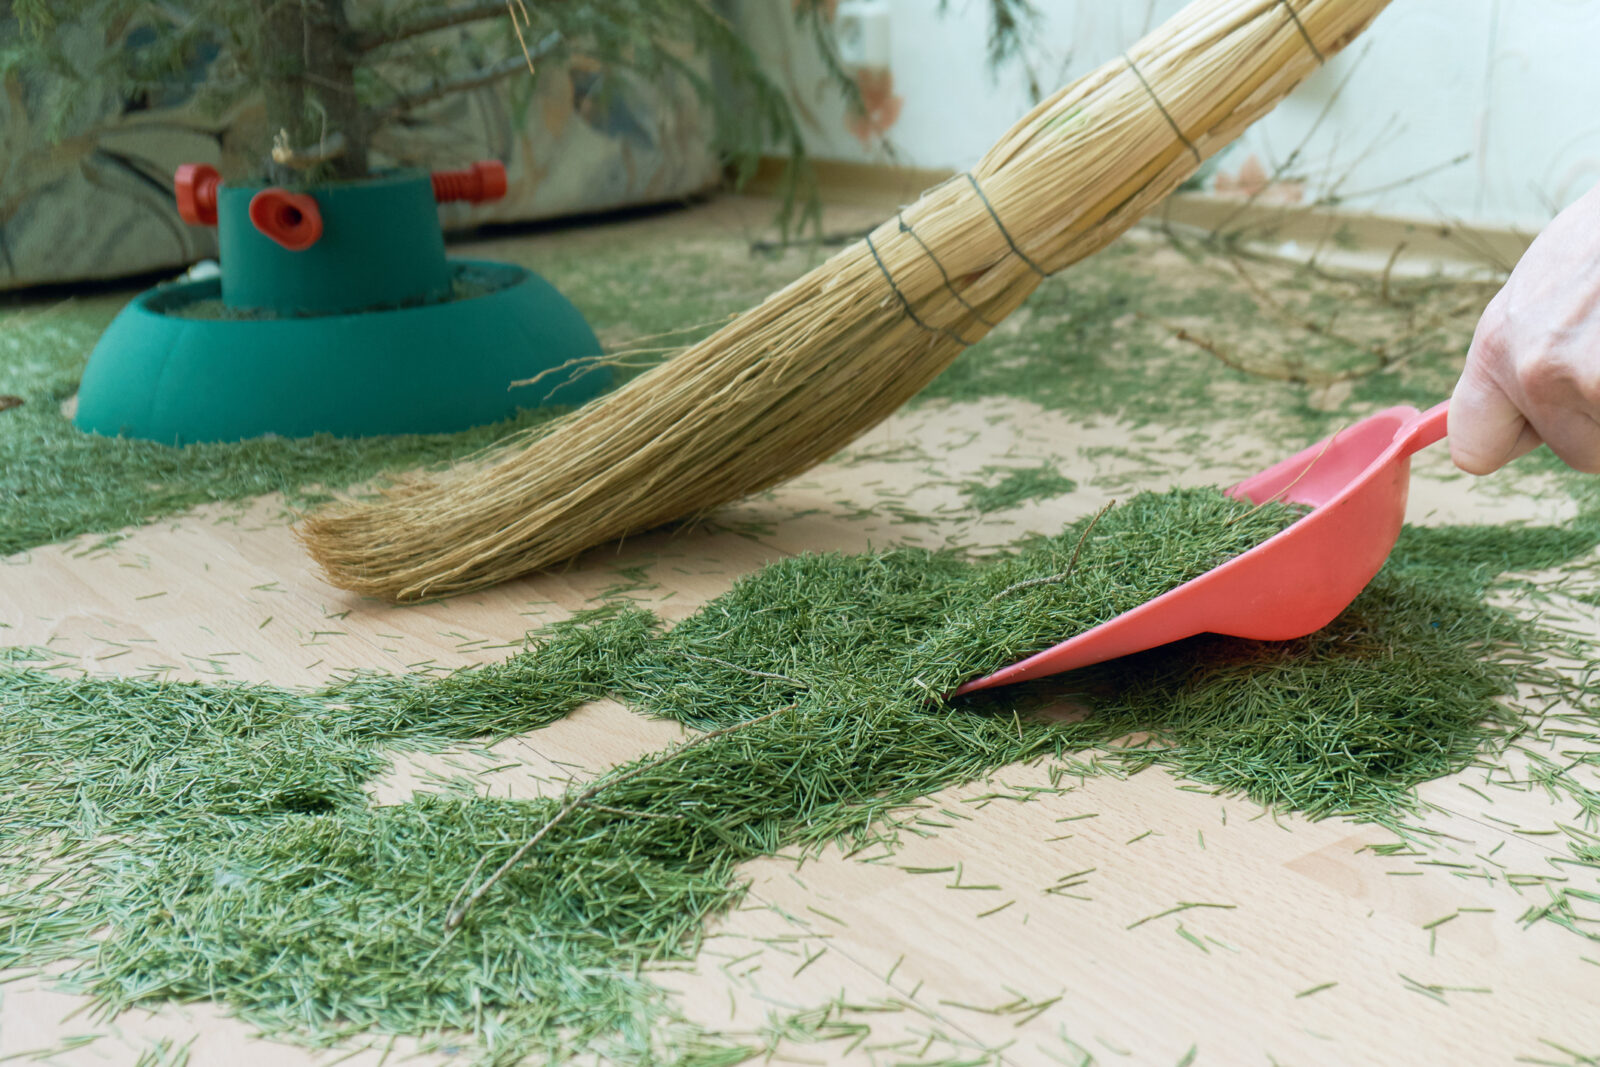 A picture of someone cleaning up pine needles with dustpan and brush for an LCA post on recycling your Christmas tree.